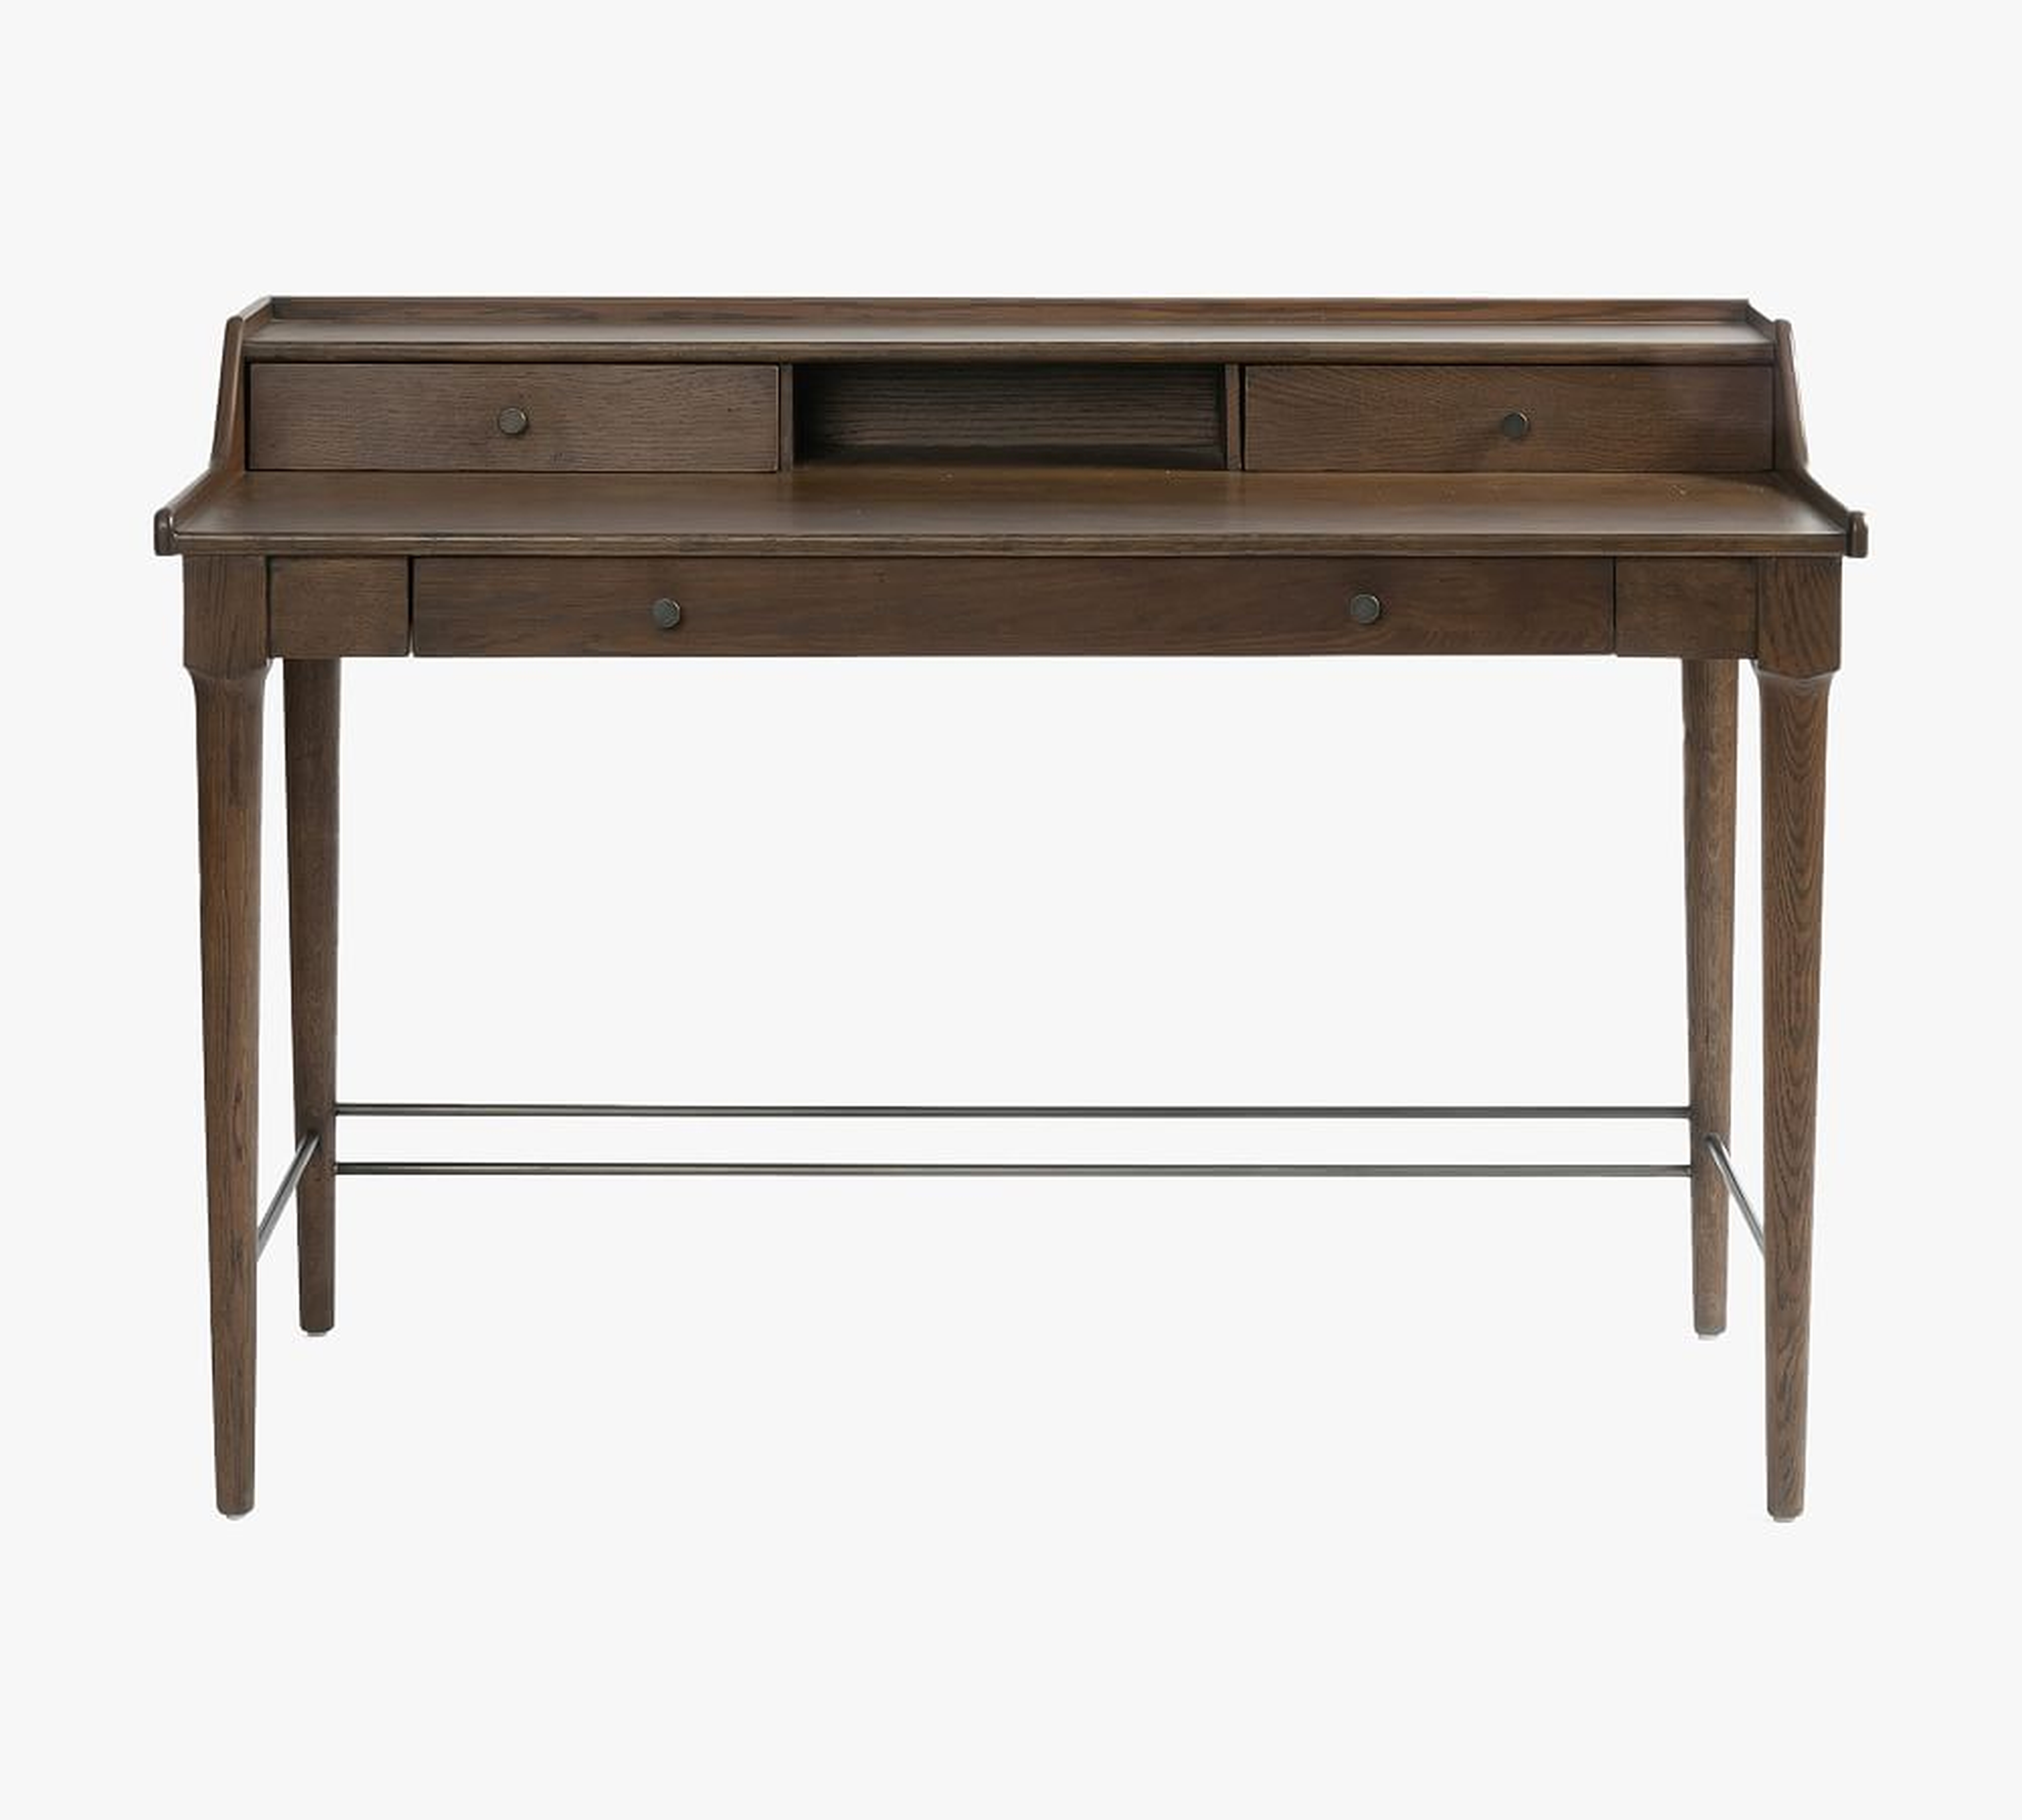 Fallon 48" Writing Desk with Drawers, Dark Toasted Oak - Pottery Barn